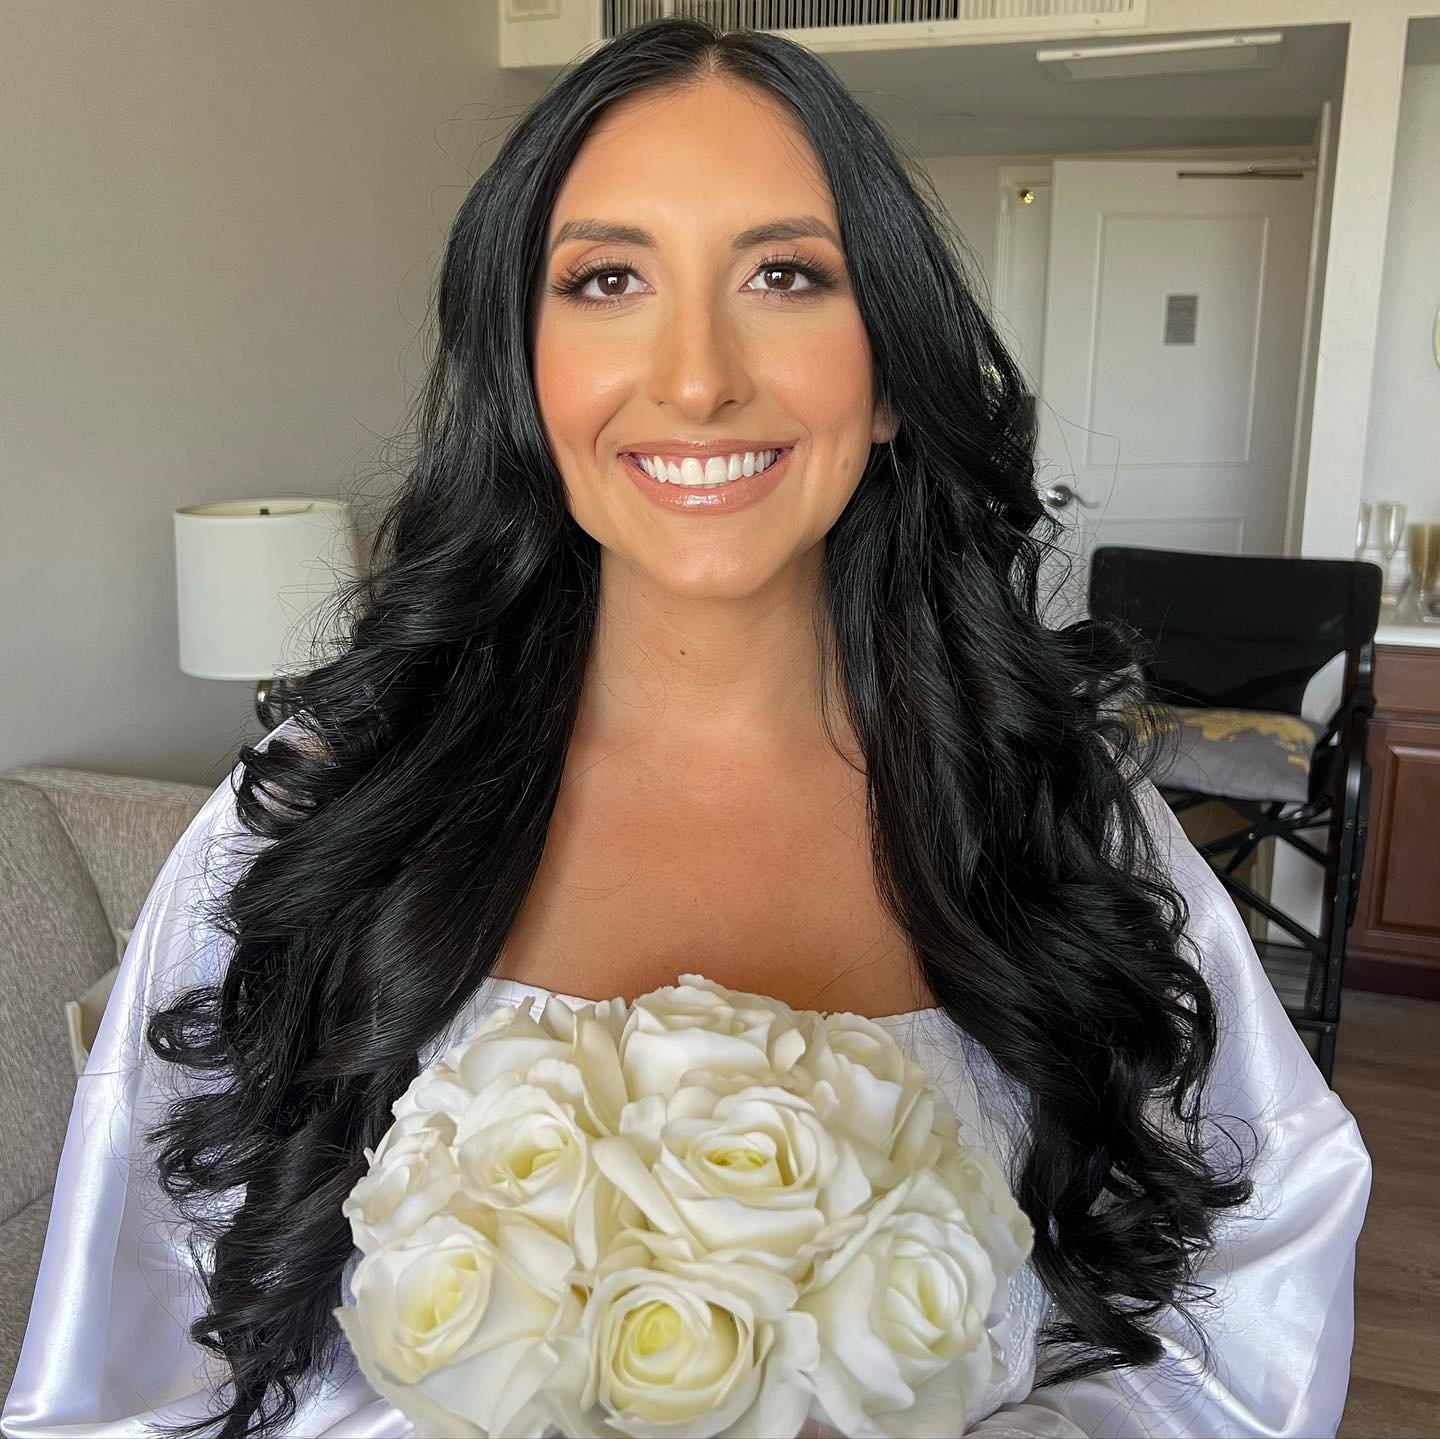 Before and after on this beautiful soul! Congrats Mekenna on your big day and thanks so much for choosing me to be your stylist! 
.
.
.
#purebeautybydanielle #ocmua #ocmakeupartist #orangecountymakeupartist #ochairstylist #ocbridalstylist #ocwedding 